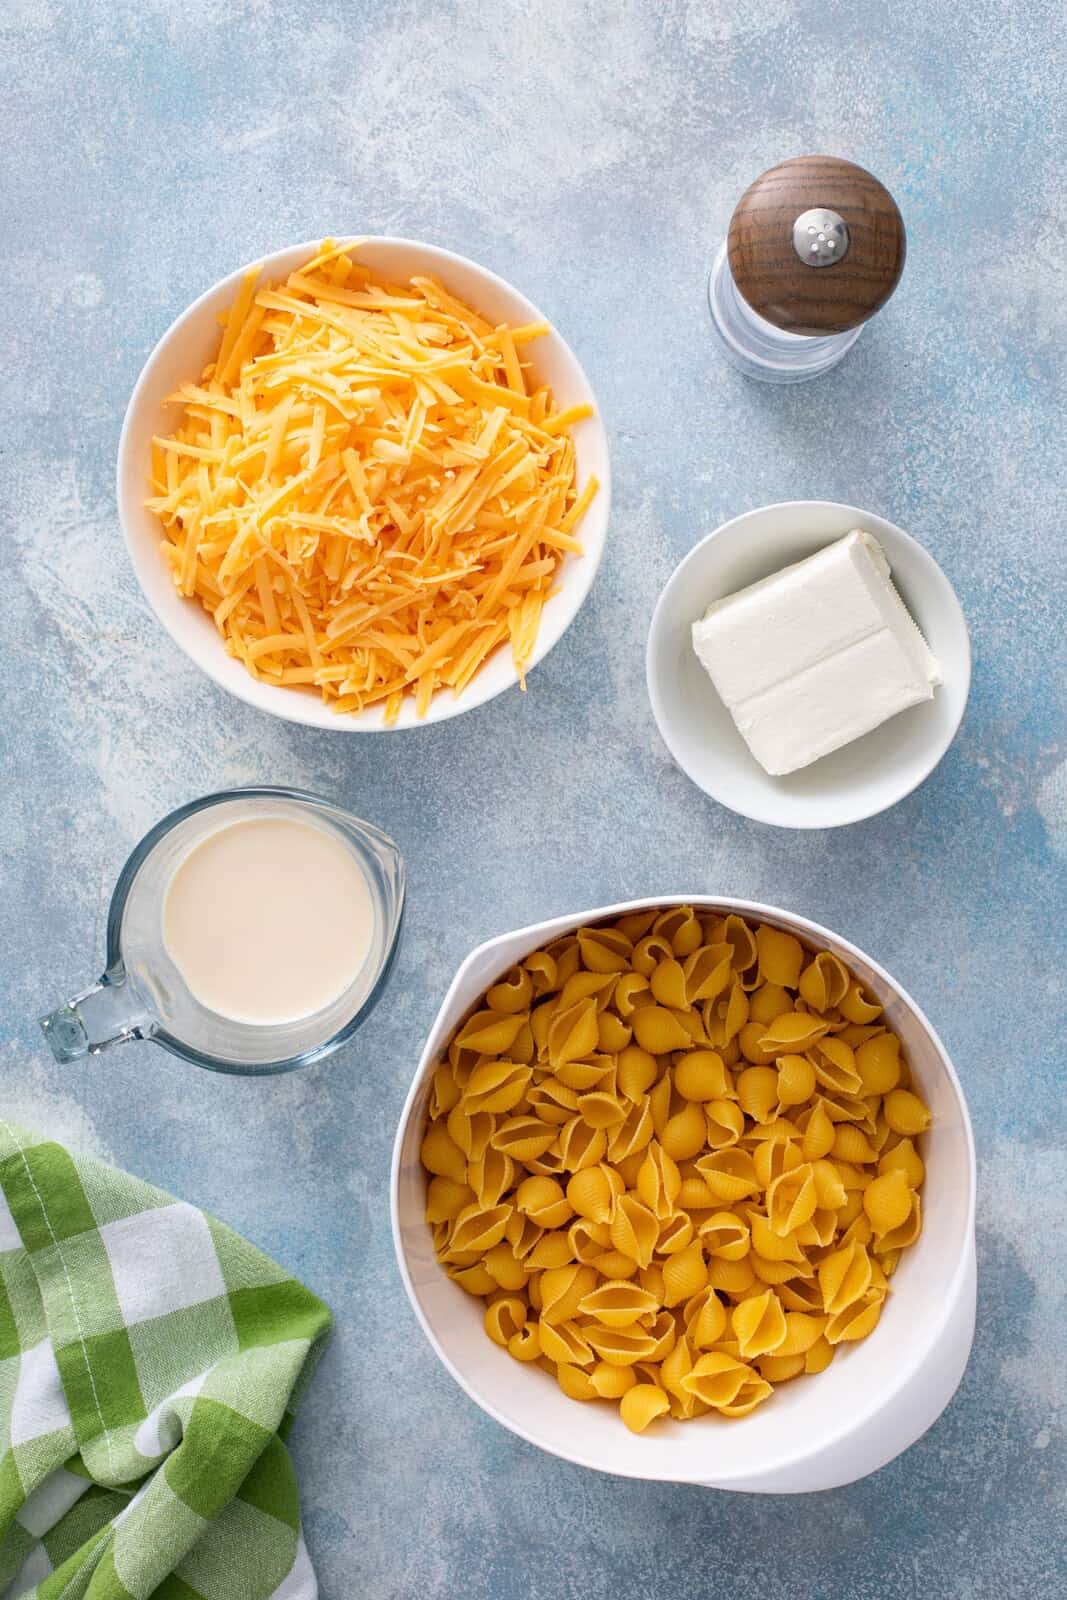 Ingredients for homemade shells and cheese arranged on a blue countertop.